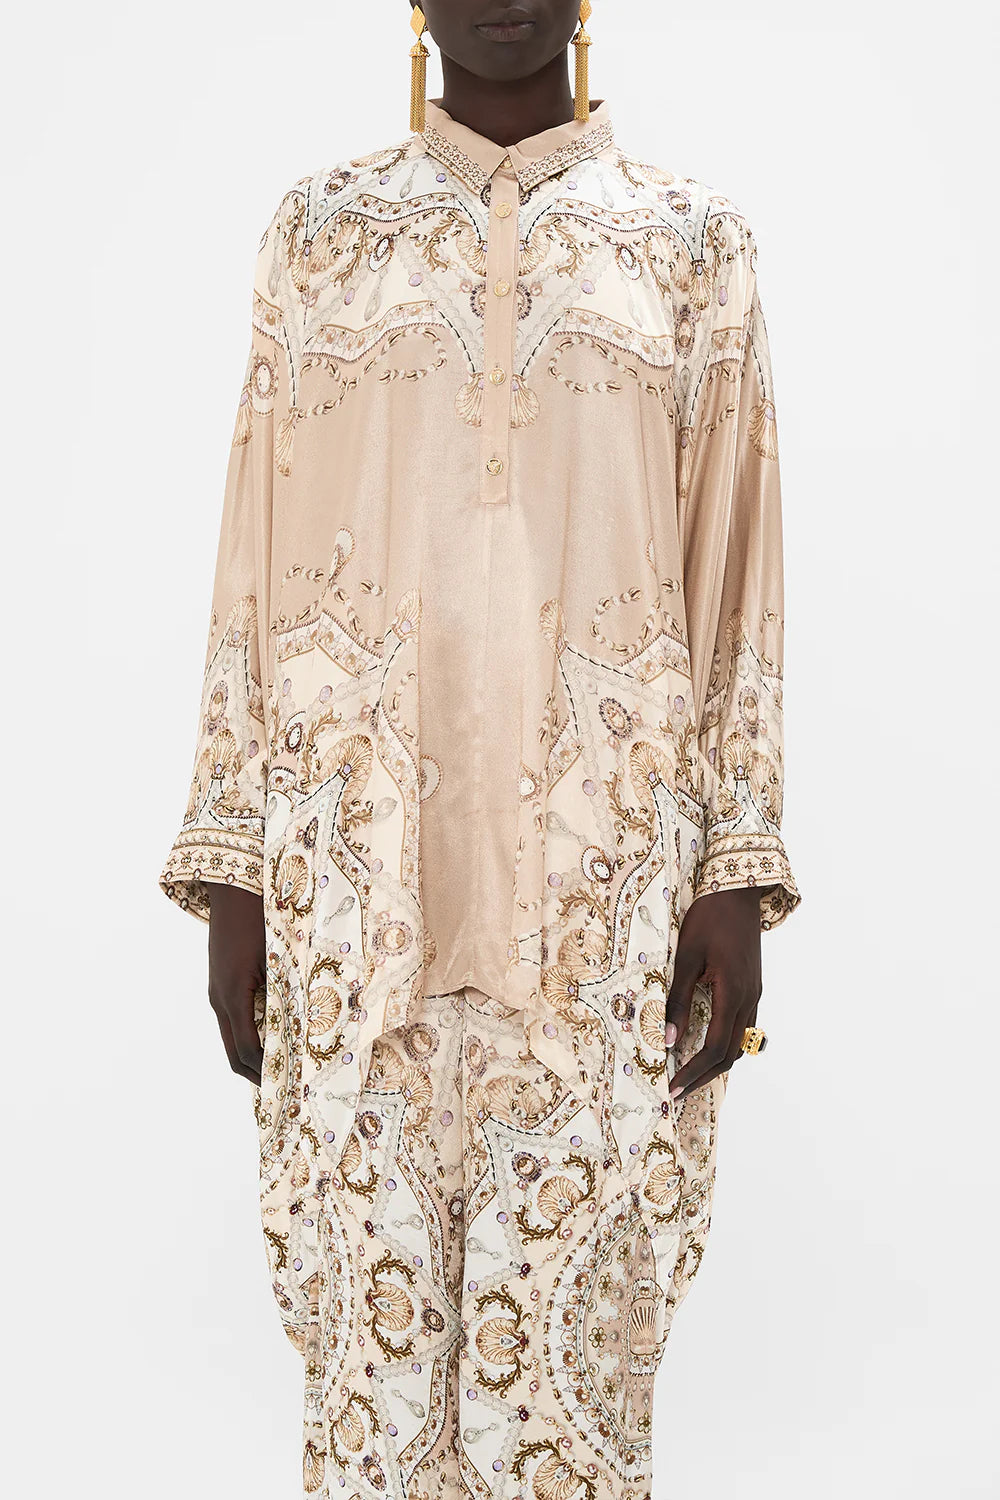 Button up top with draped back, grotto goddess